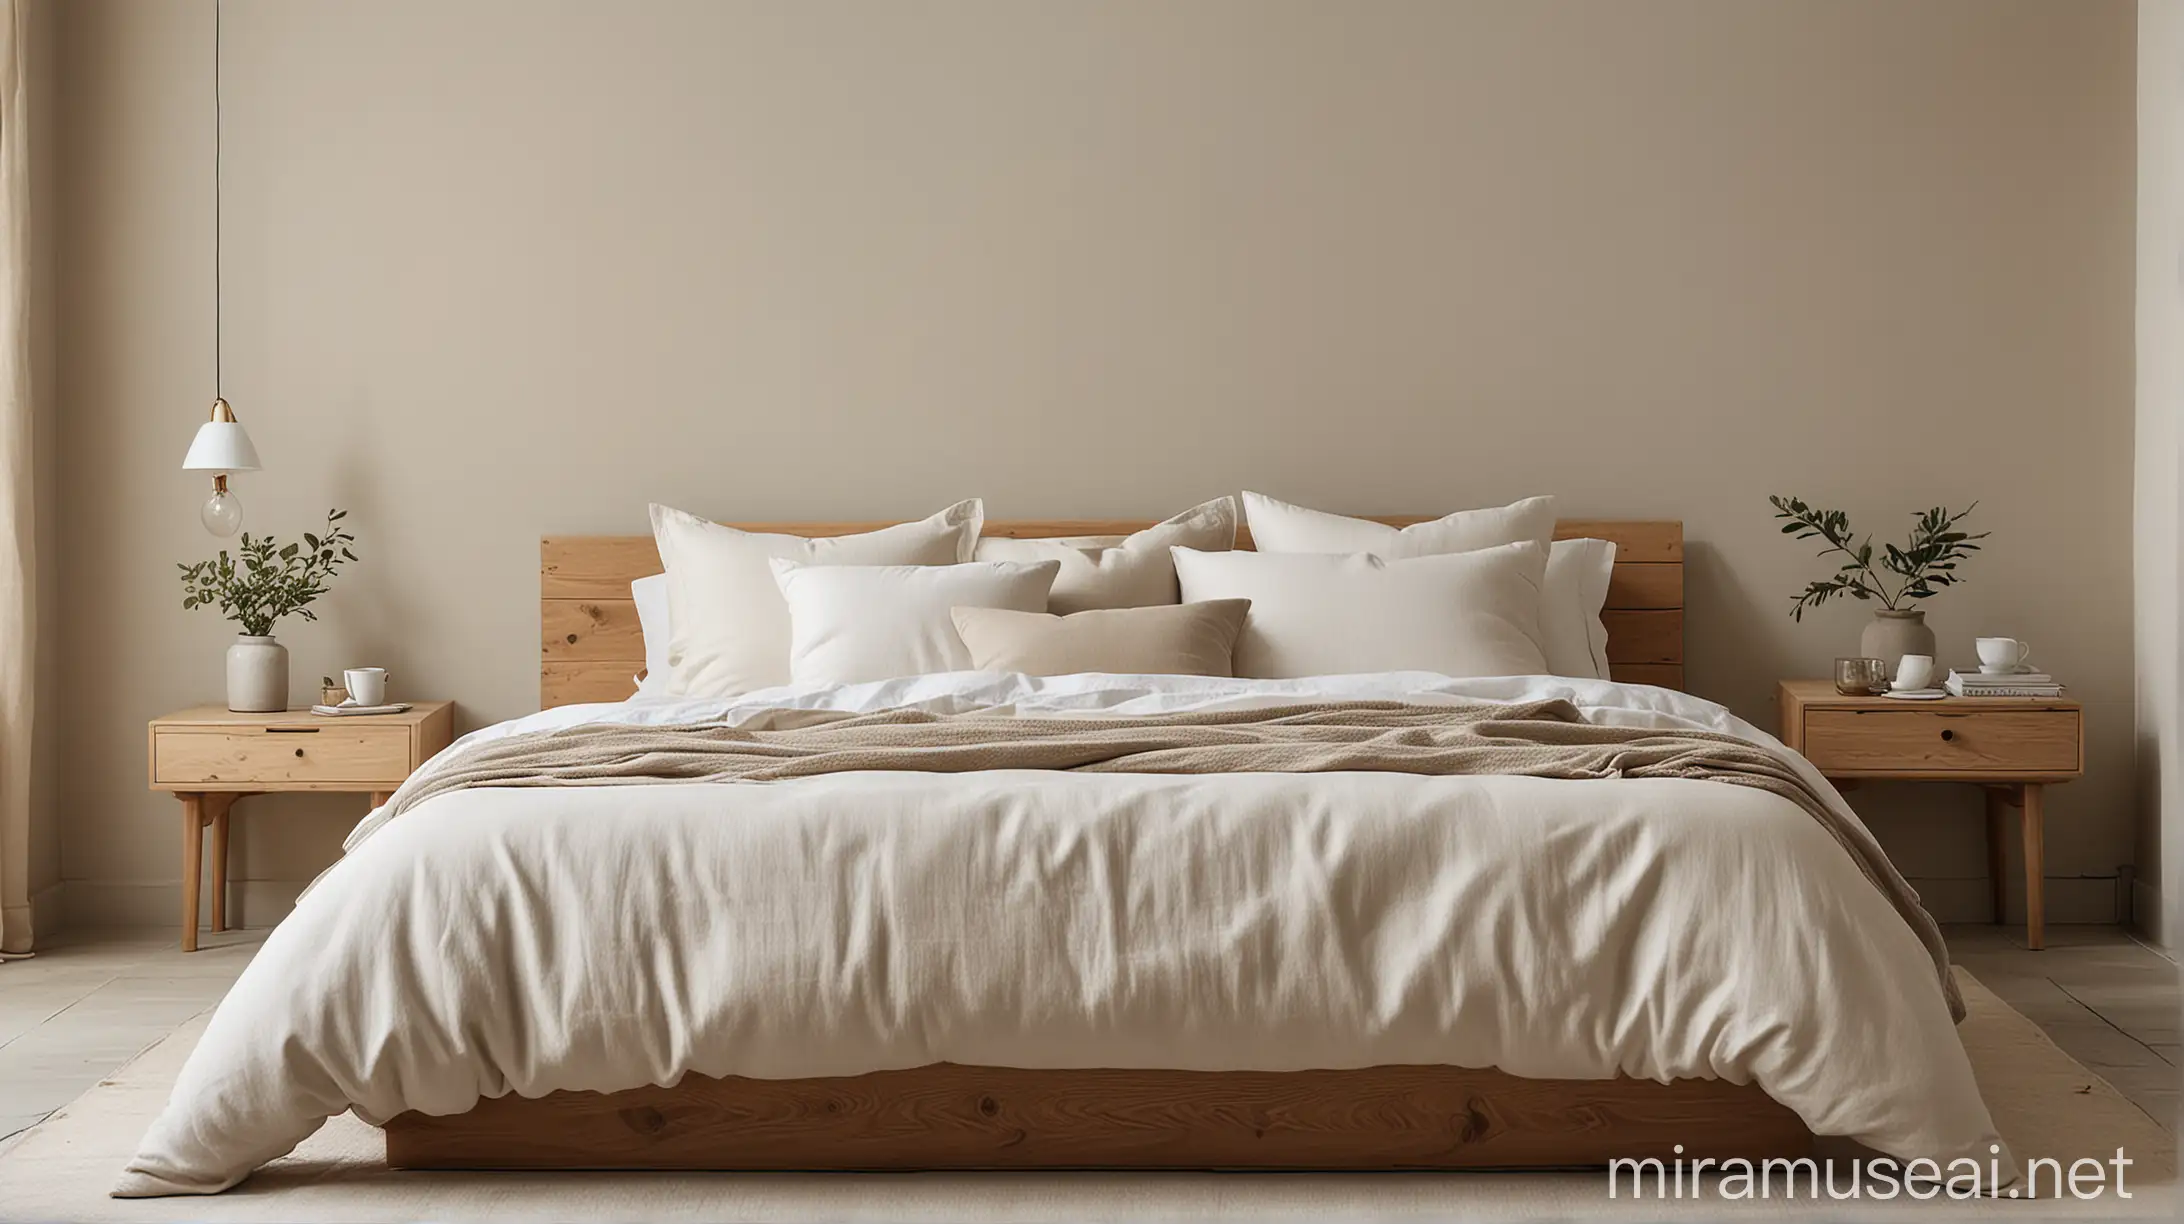 Minimalist Bedroom with White Linen Duvet and MutedToned Pillows